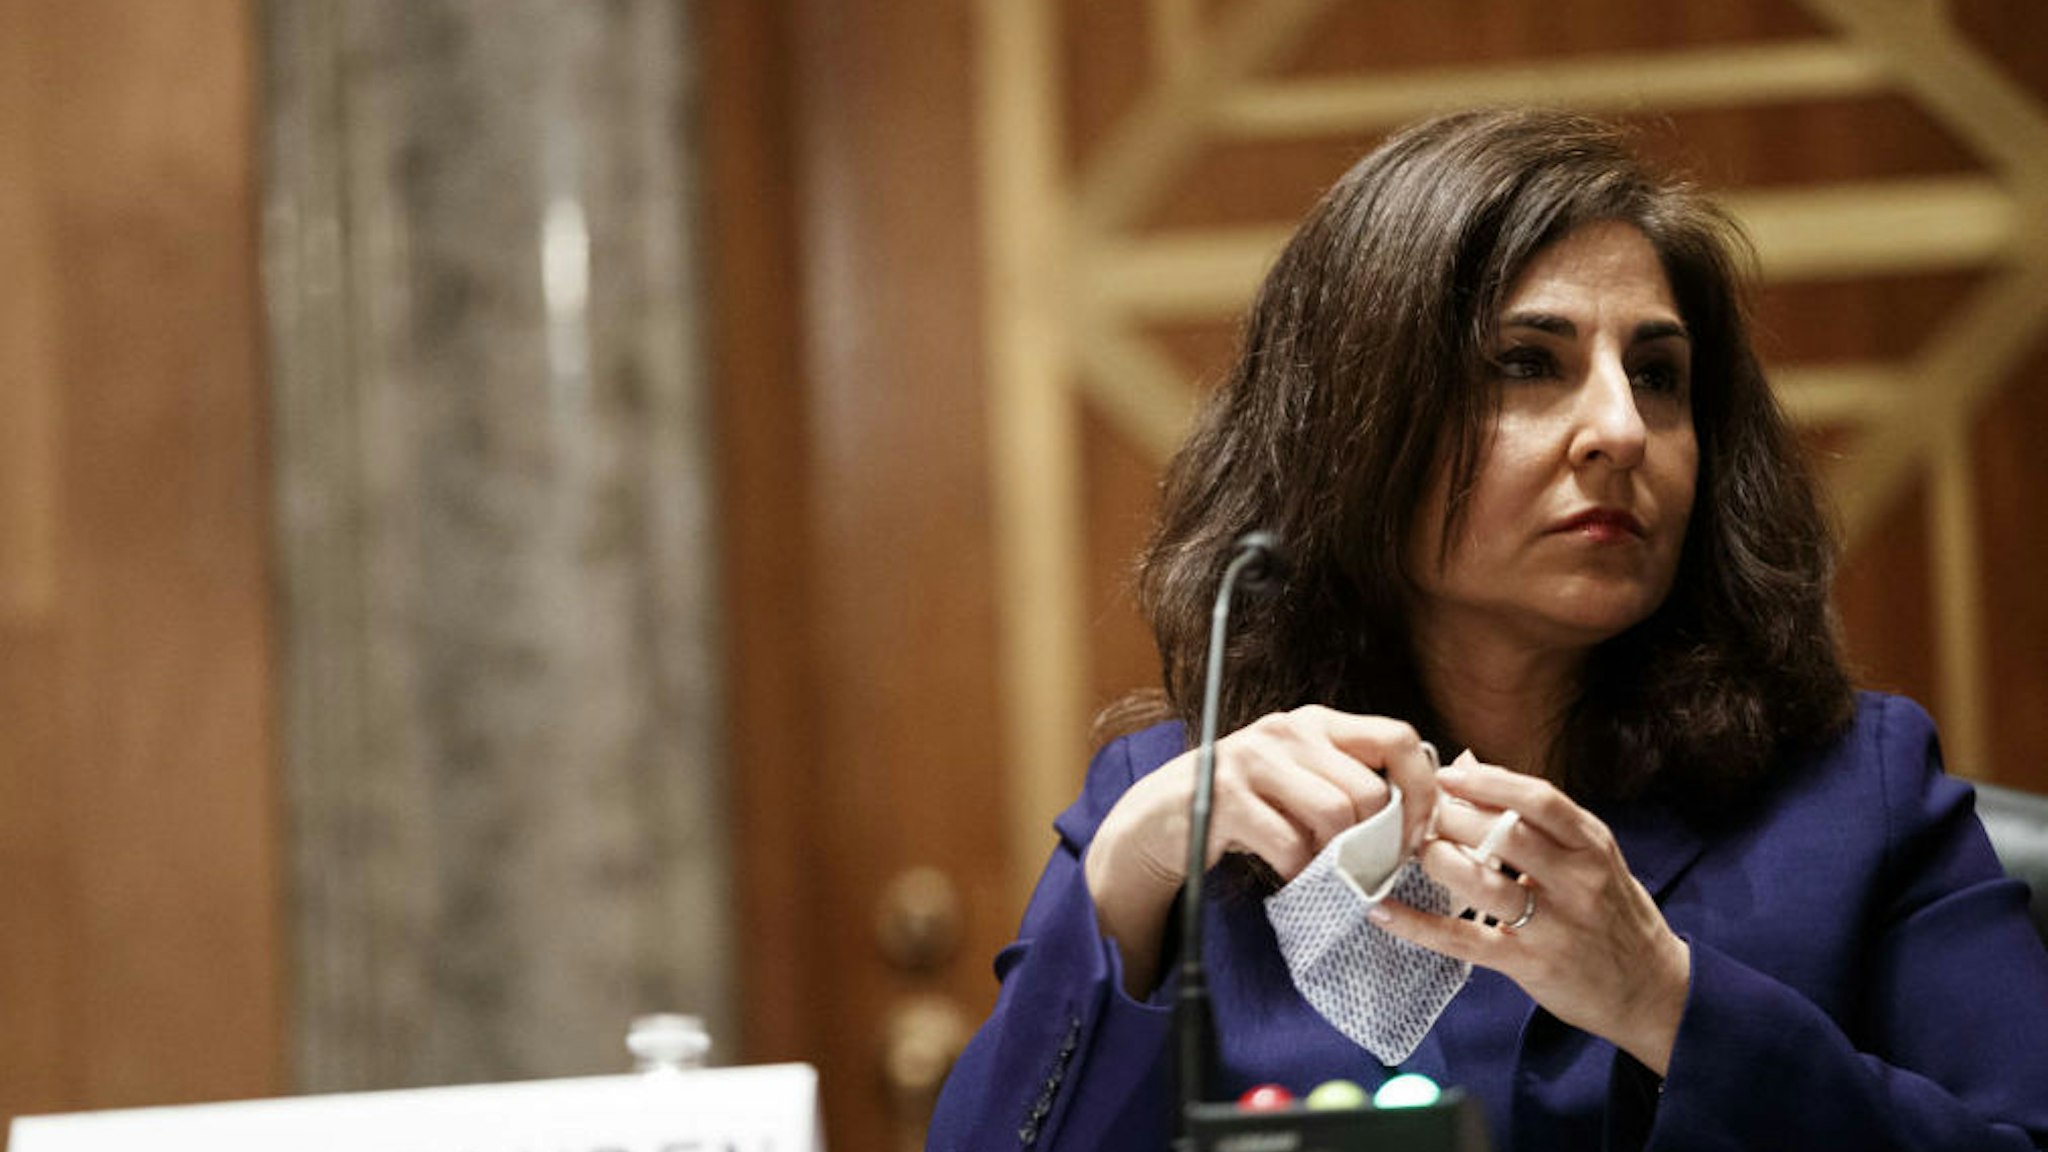 Neera Tanden, director of the Office and Management and Budget (OMB) nominee for U.S. President Joe Biden, removes her mask during a Senate Homeland Security and Governmental Affairs Committee confirmation hearing in Washington, D.C., U.S., on Tuesday, Feb. 9, 2021. Tanden, who pledged to work with both parties after drawing sharp criticism from Republicans for sniping at them on social media, worked on the Affordable Care Act during the Obama years and was an aide to Hillary Clinton from her time as first lady.